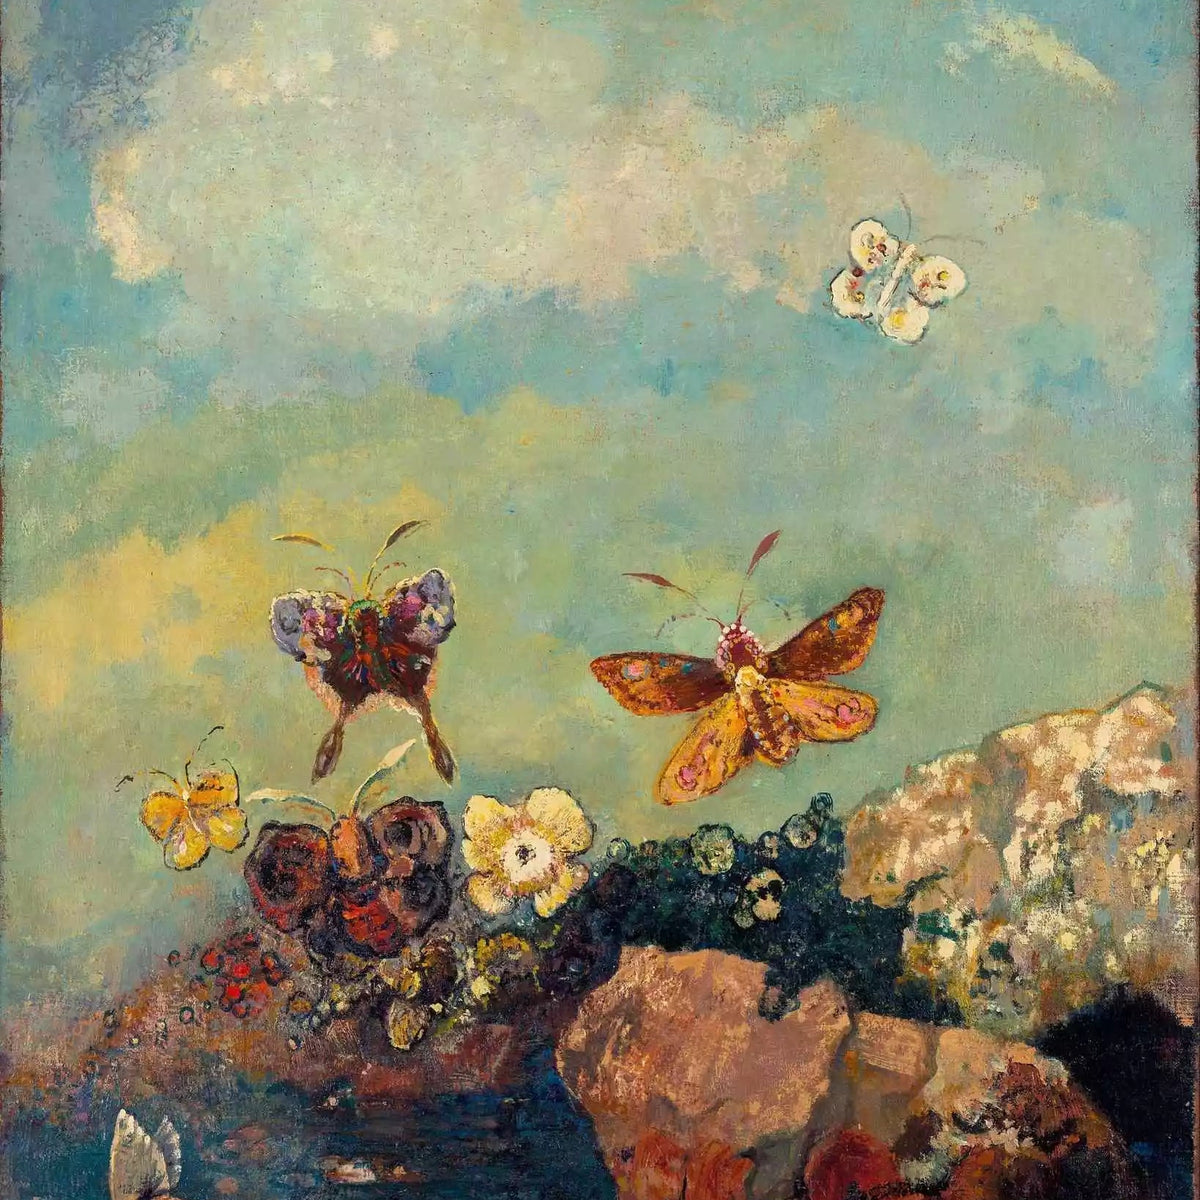 Butterflies - Diamond Painting-Diamond Painting-16"x20" (40x50cm)-Canvas by Numbers US